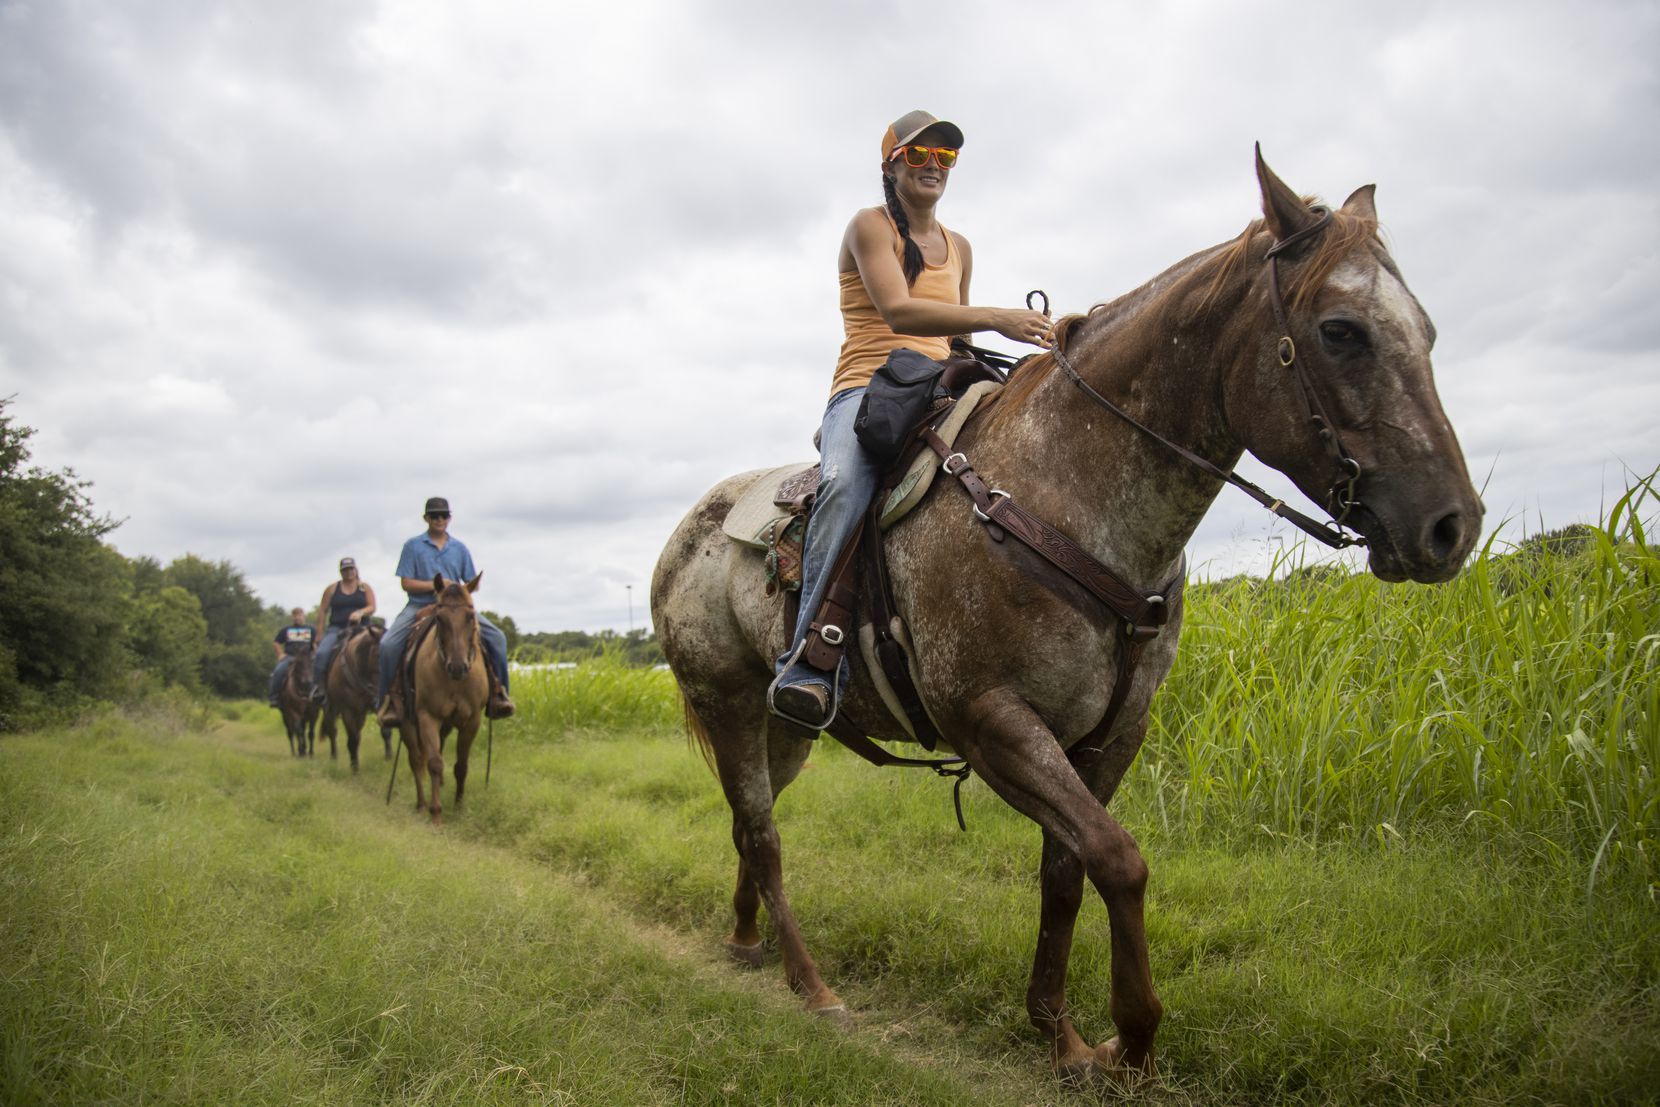 Riders celebrate a friend's birthday by having a ride through the equestrian trail at Ray...